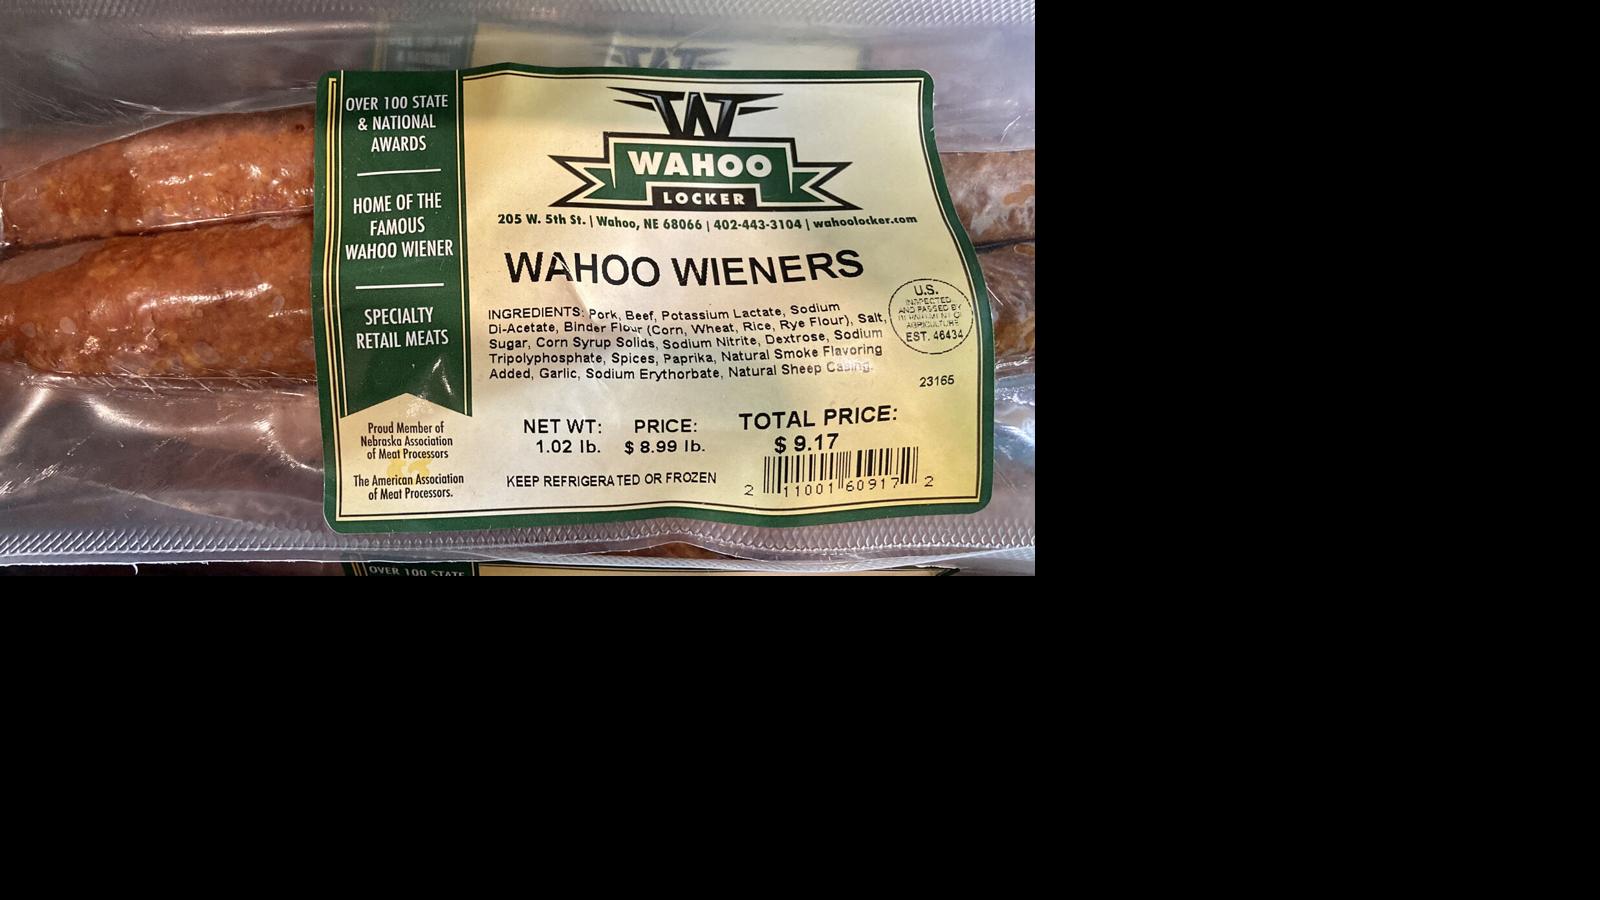 A cut above: Award-winning meat products from Wahoo Locker now available in Grand island